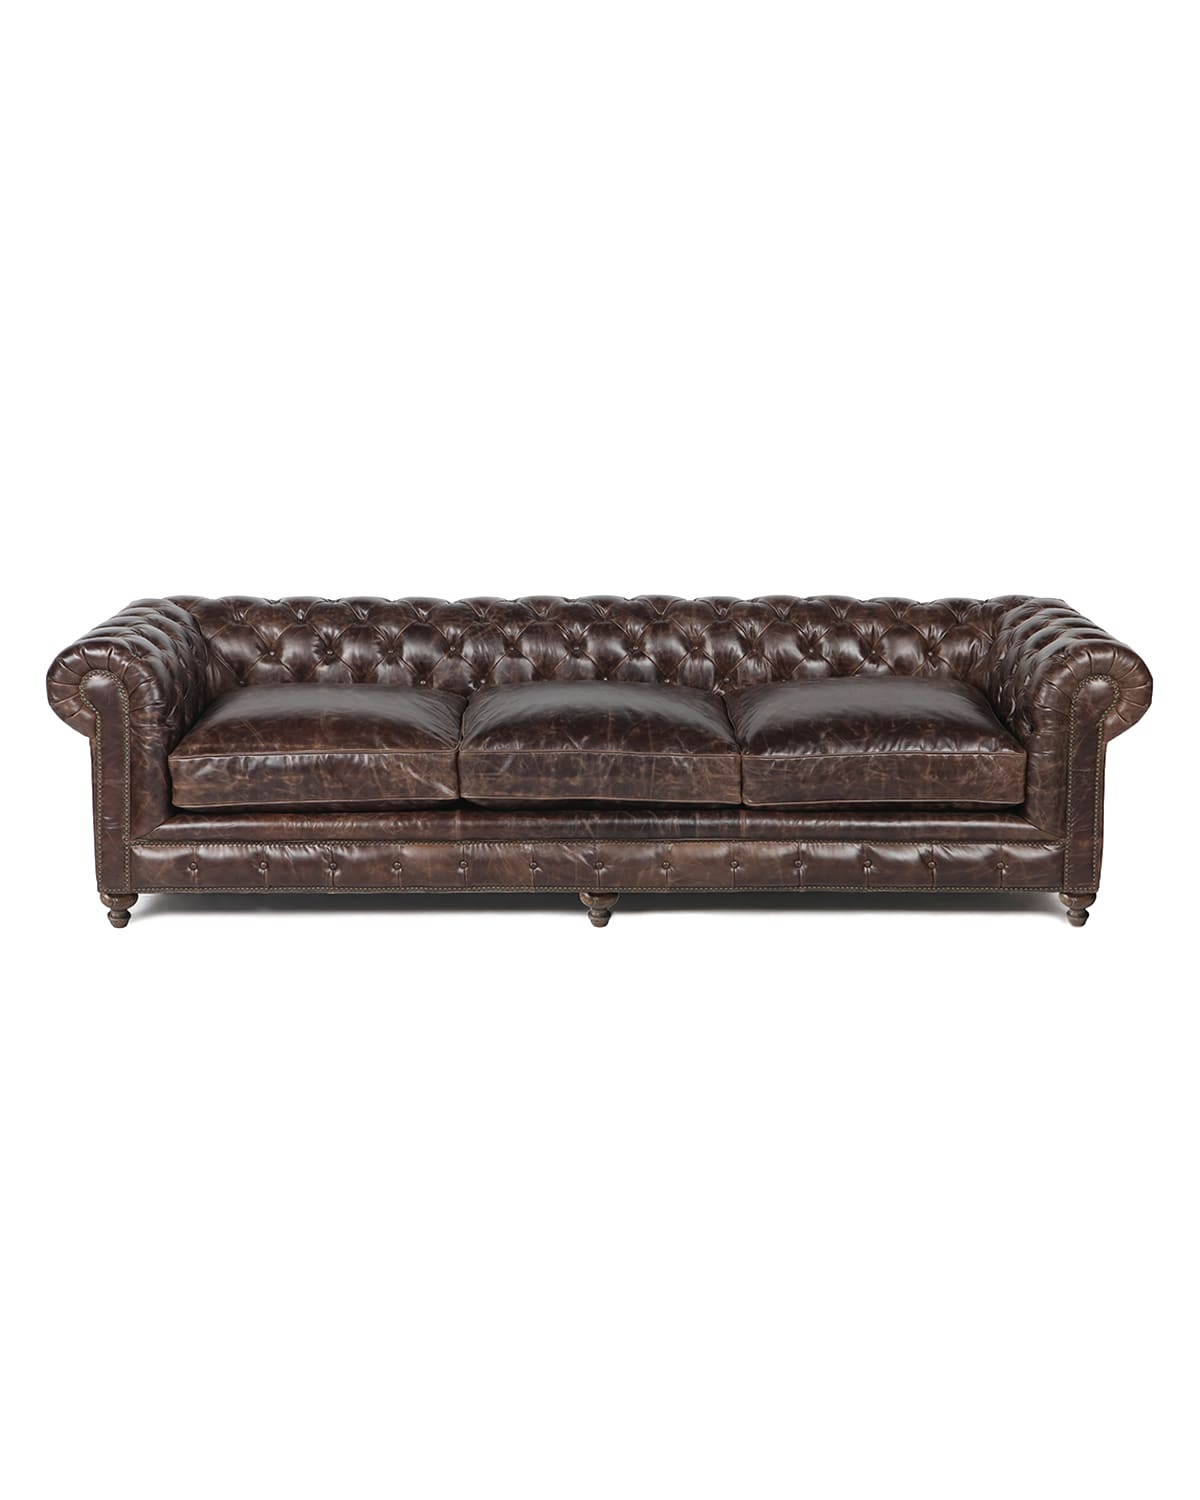 Image Warner Leather Collection 118" Chesterfield Sofa